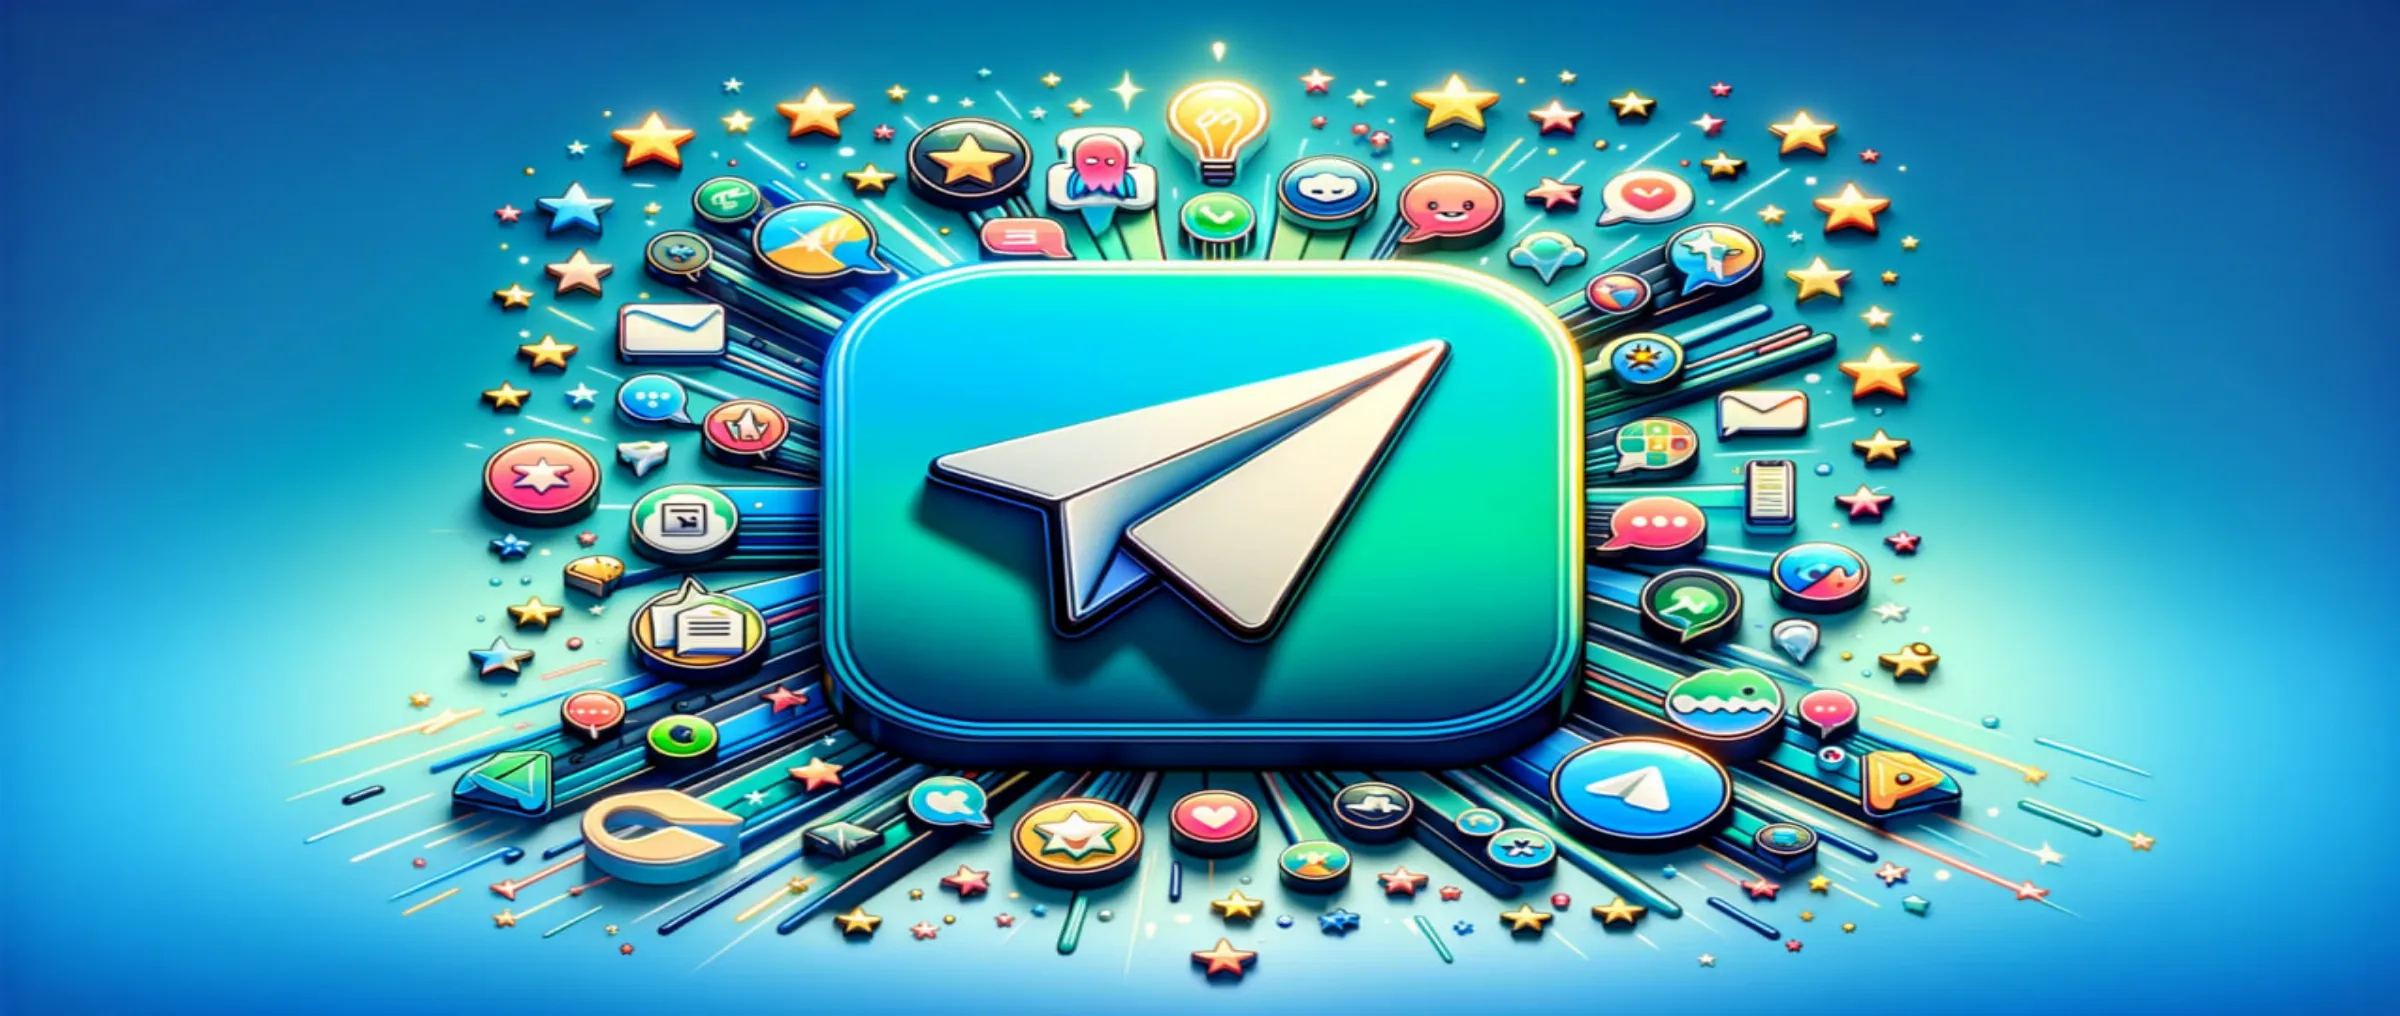 Telegram Stars: What It Is and How to Earn "Stars" in Telegram